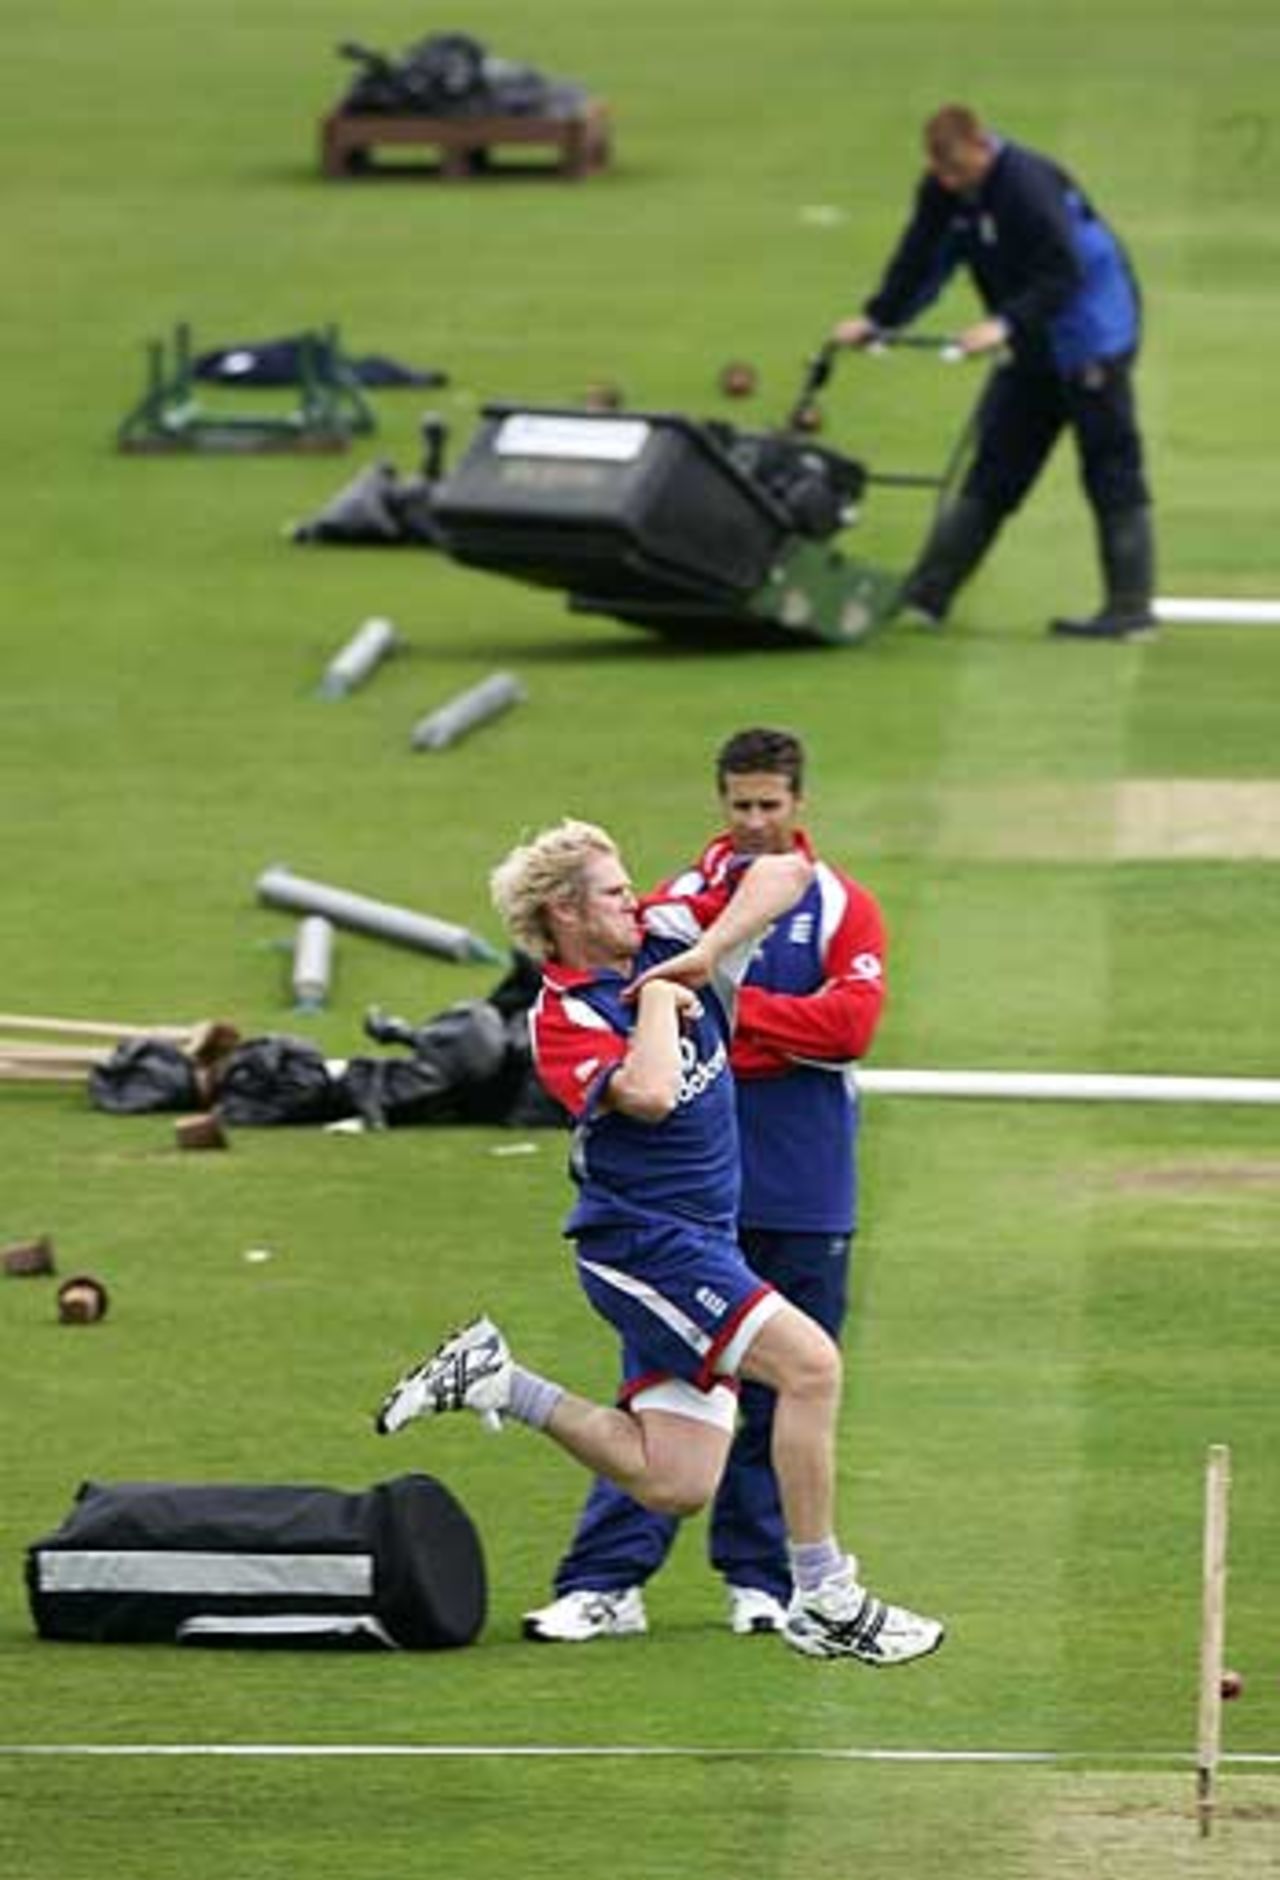 Matthew Hoggard at practice with Troy Cooley, England v Bangladesh, 2nd Test, Chester-le-Street, May 2